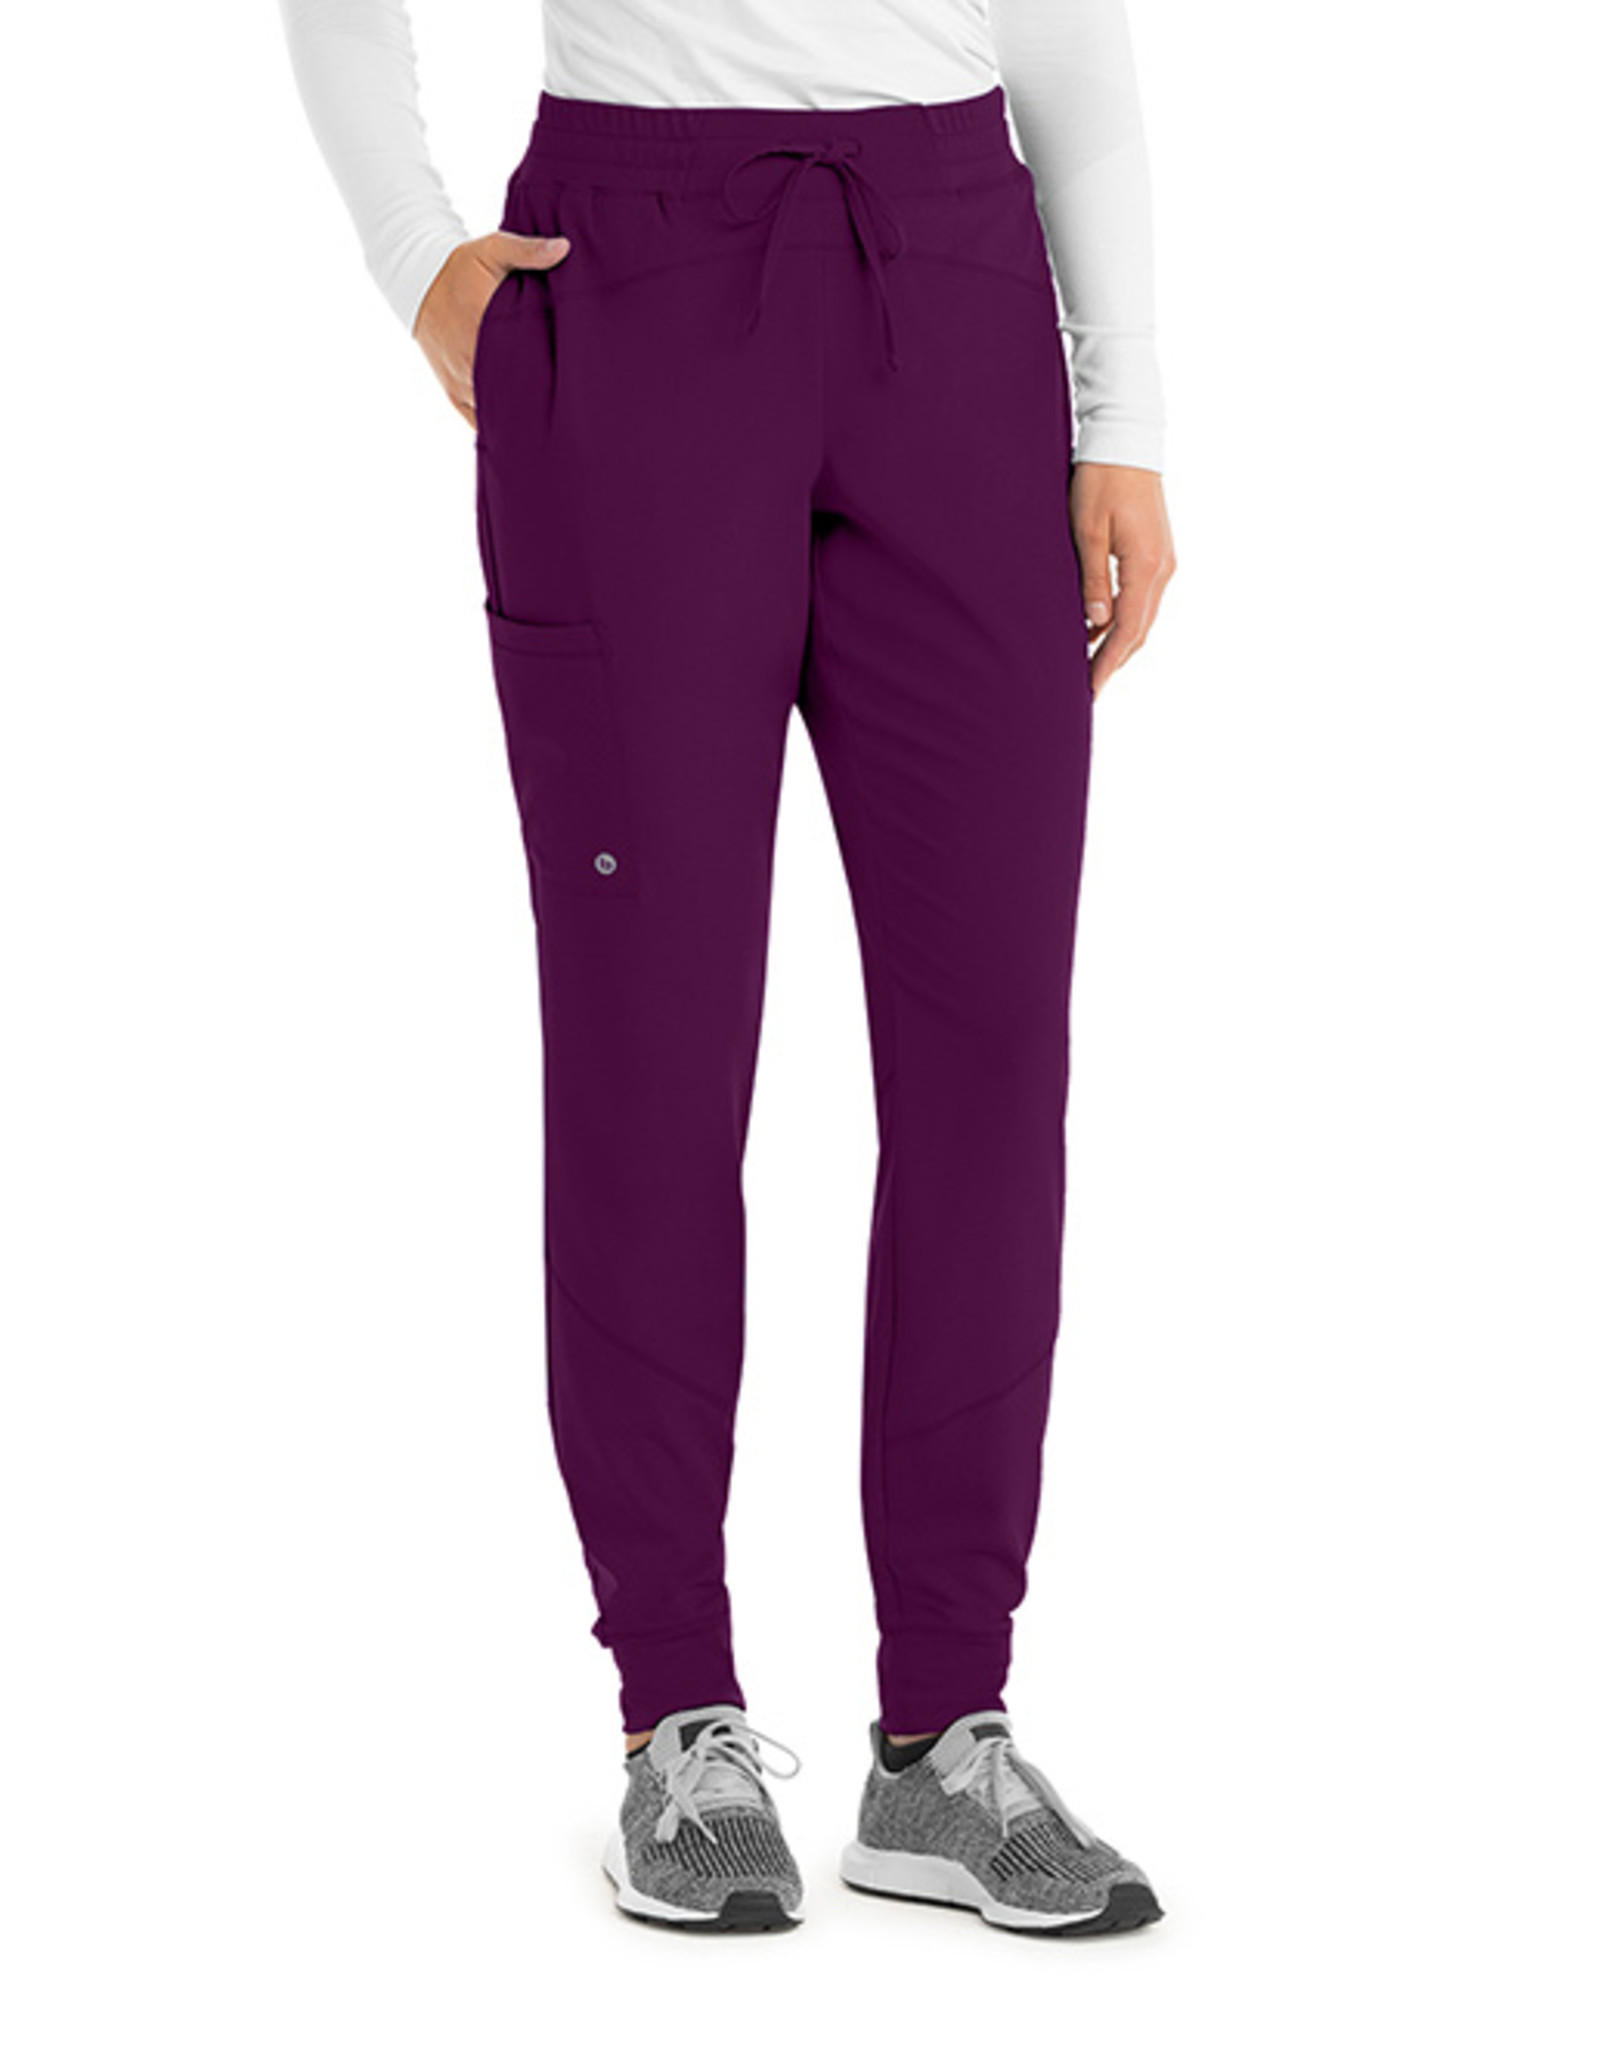 Barco One Women's Boost Jogger Pant (Petite) - Just Scrubs